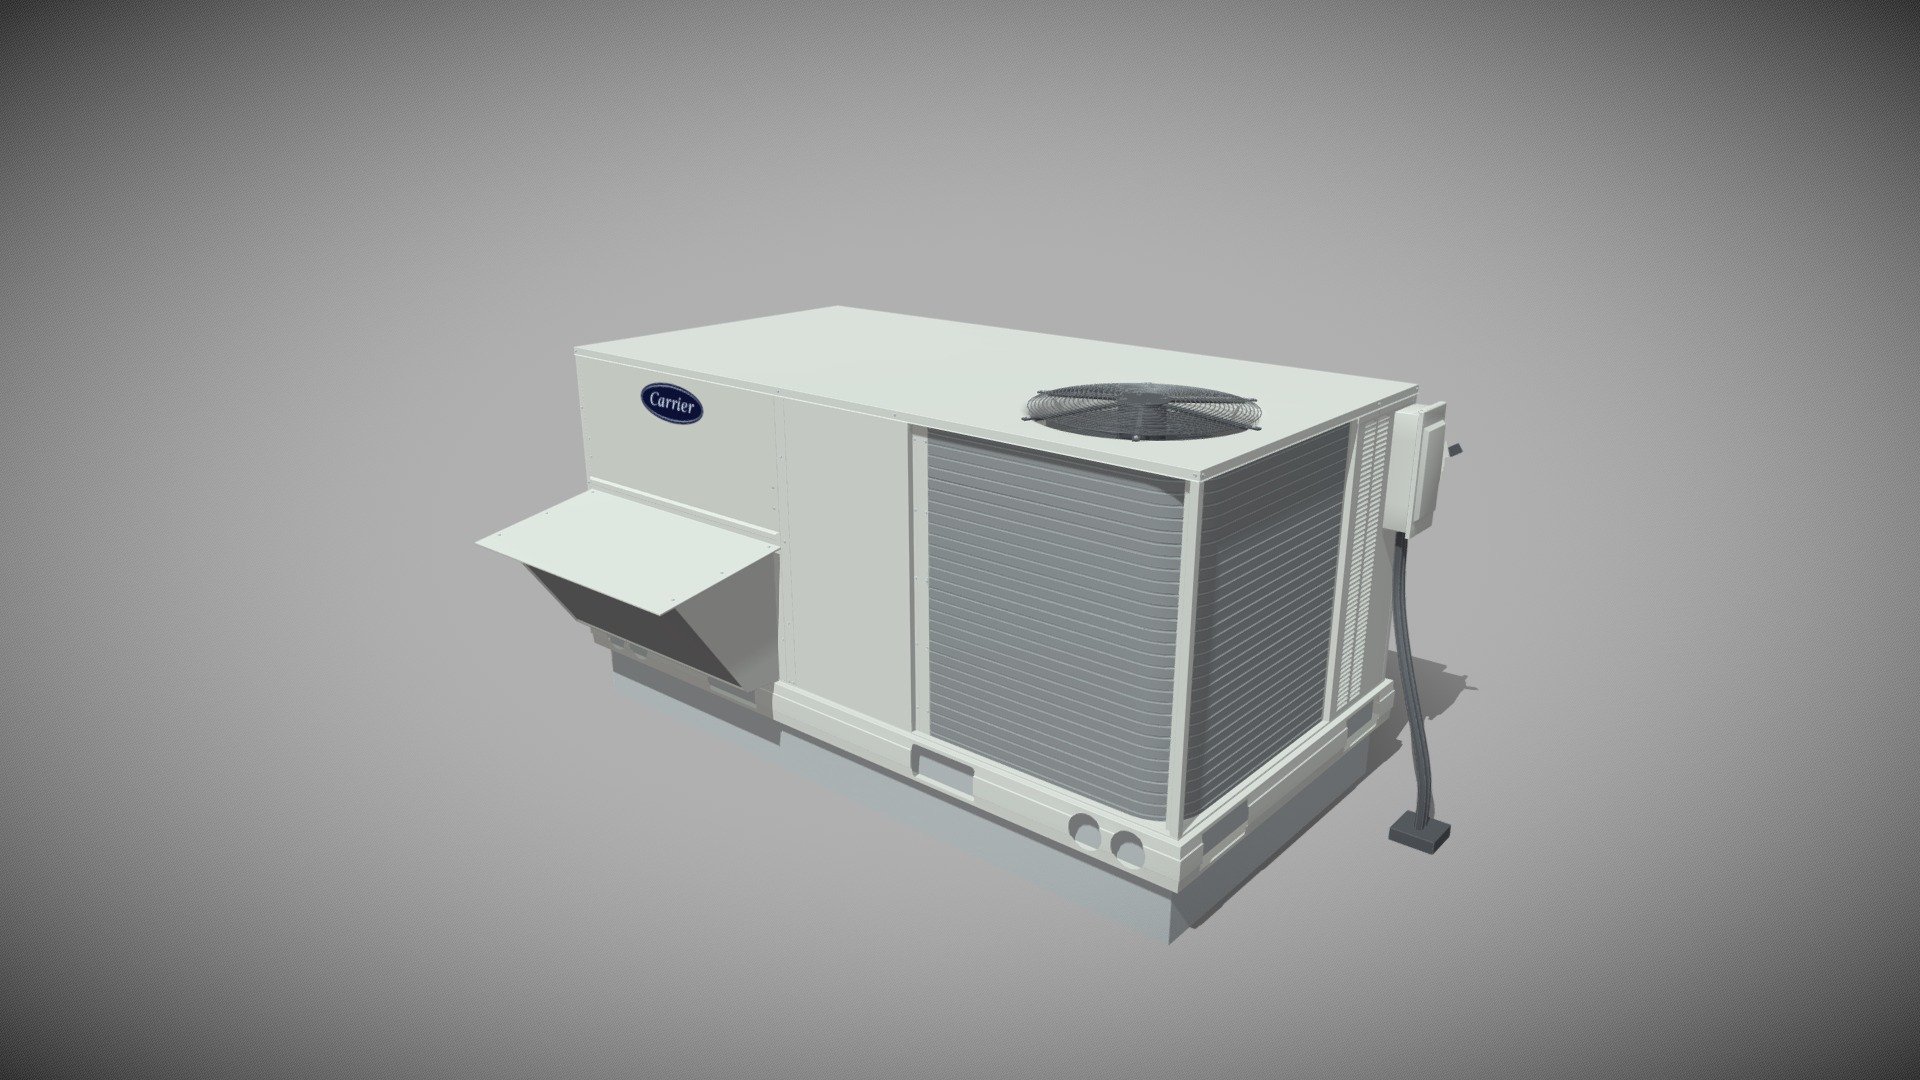 Detailed model of a Carrier Rooftop AC, modeled in Cinema 4D.The model was created using approximate real world dimensions.

The model has 51,118 polys and 50,017 vertices.

An additional file has been provided containing the original Cinema 4D project file, textures and other 3d export files such as 3ds, fbx and obj 3d model